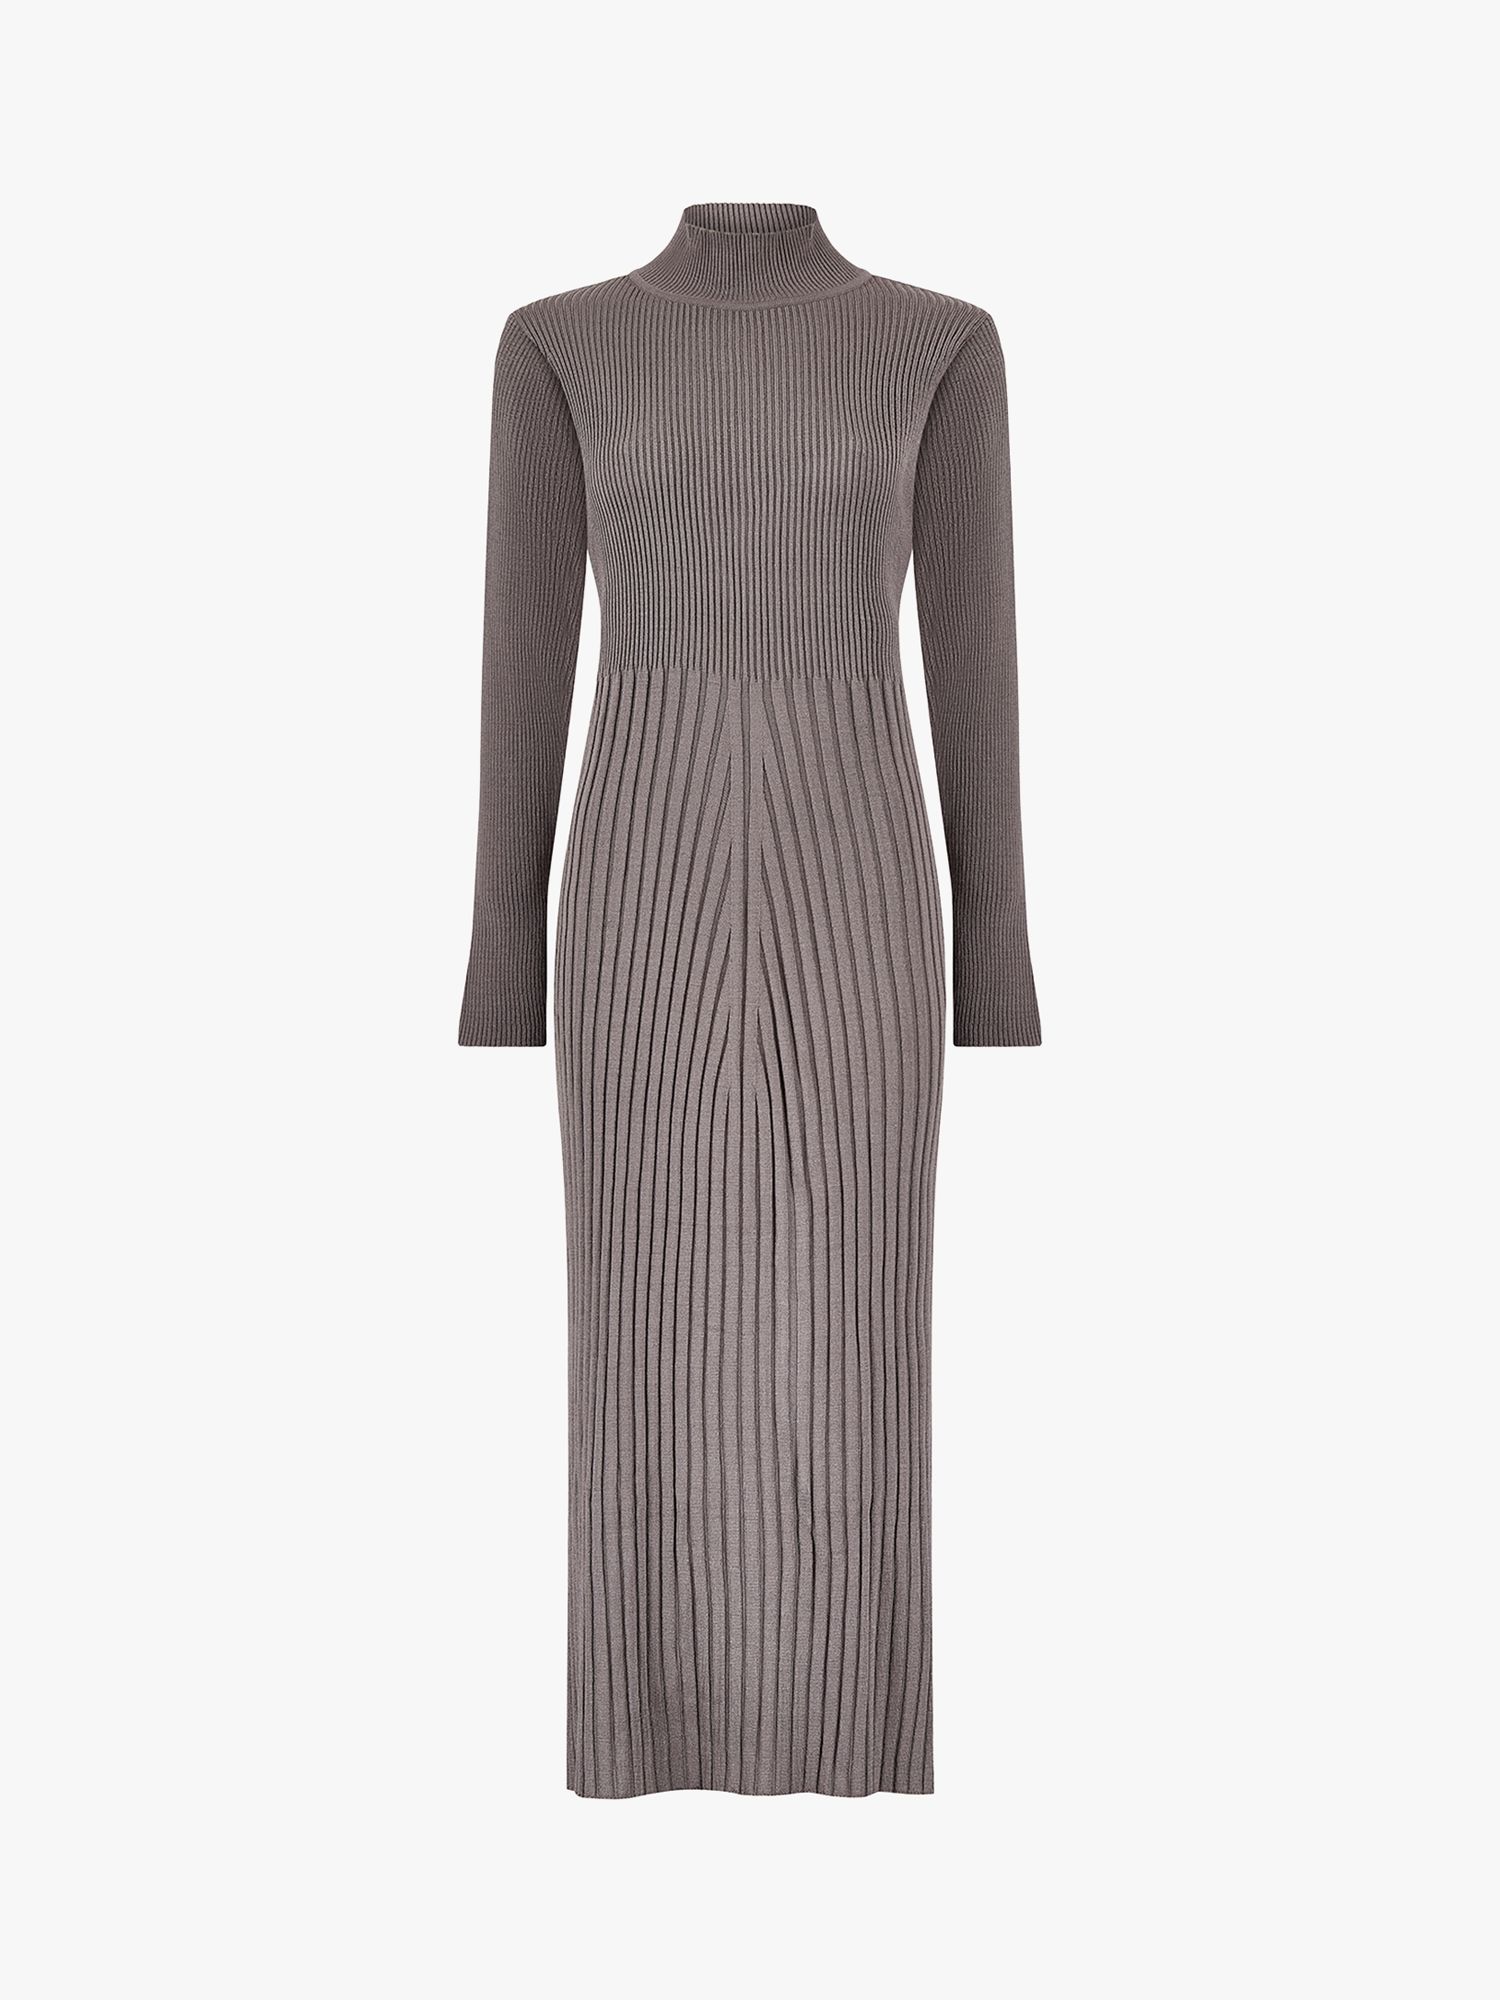 Aab Knitted Maxi Jumper Dress, Greige at John Lewis & Partners